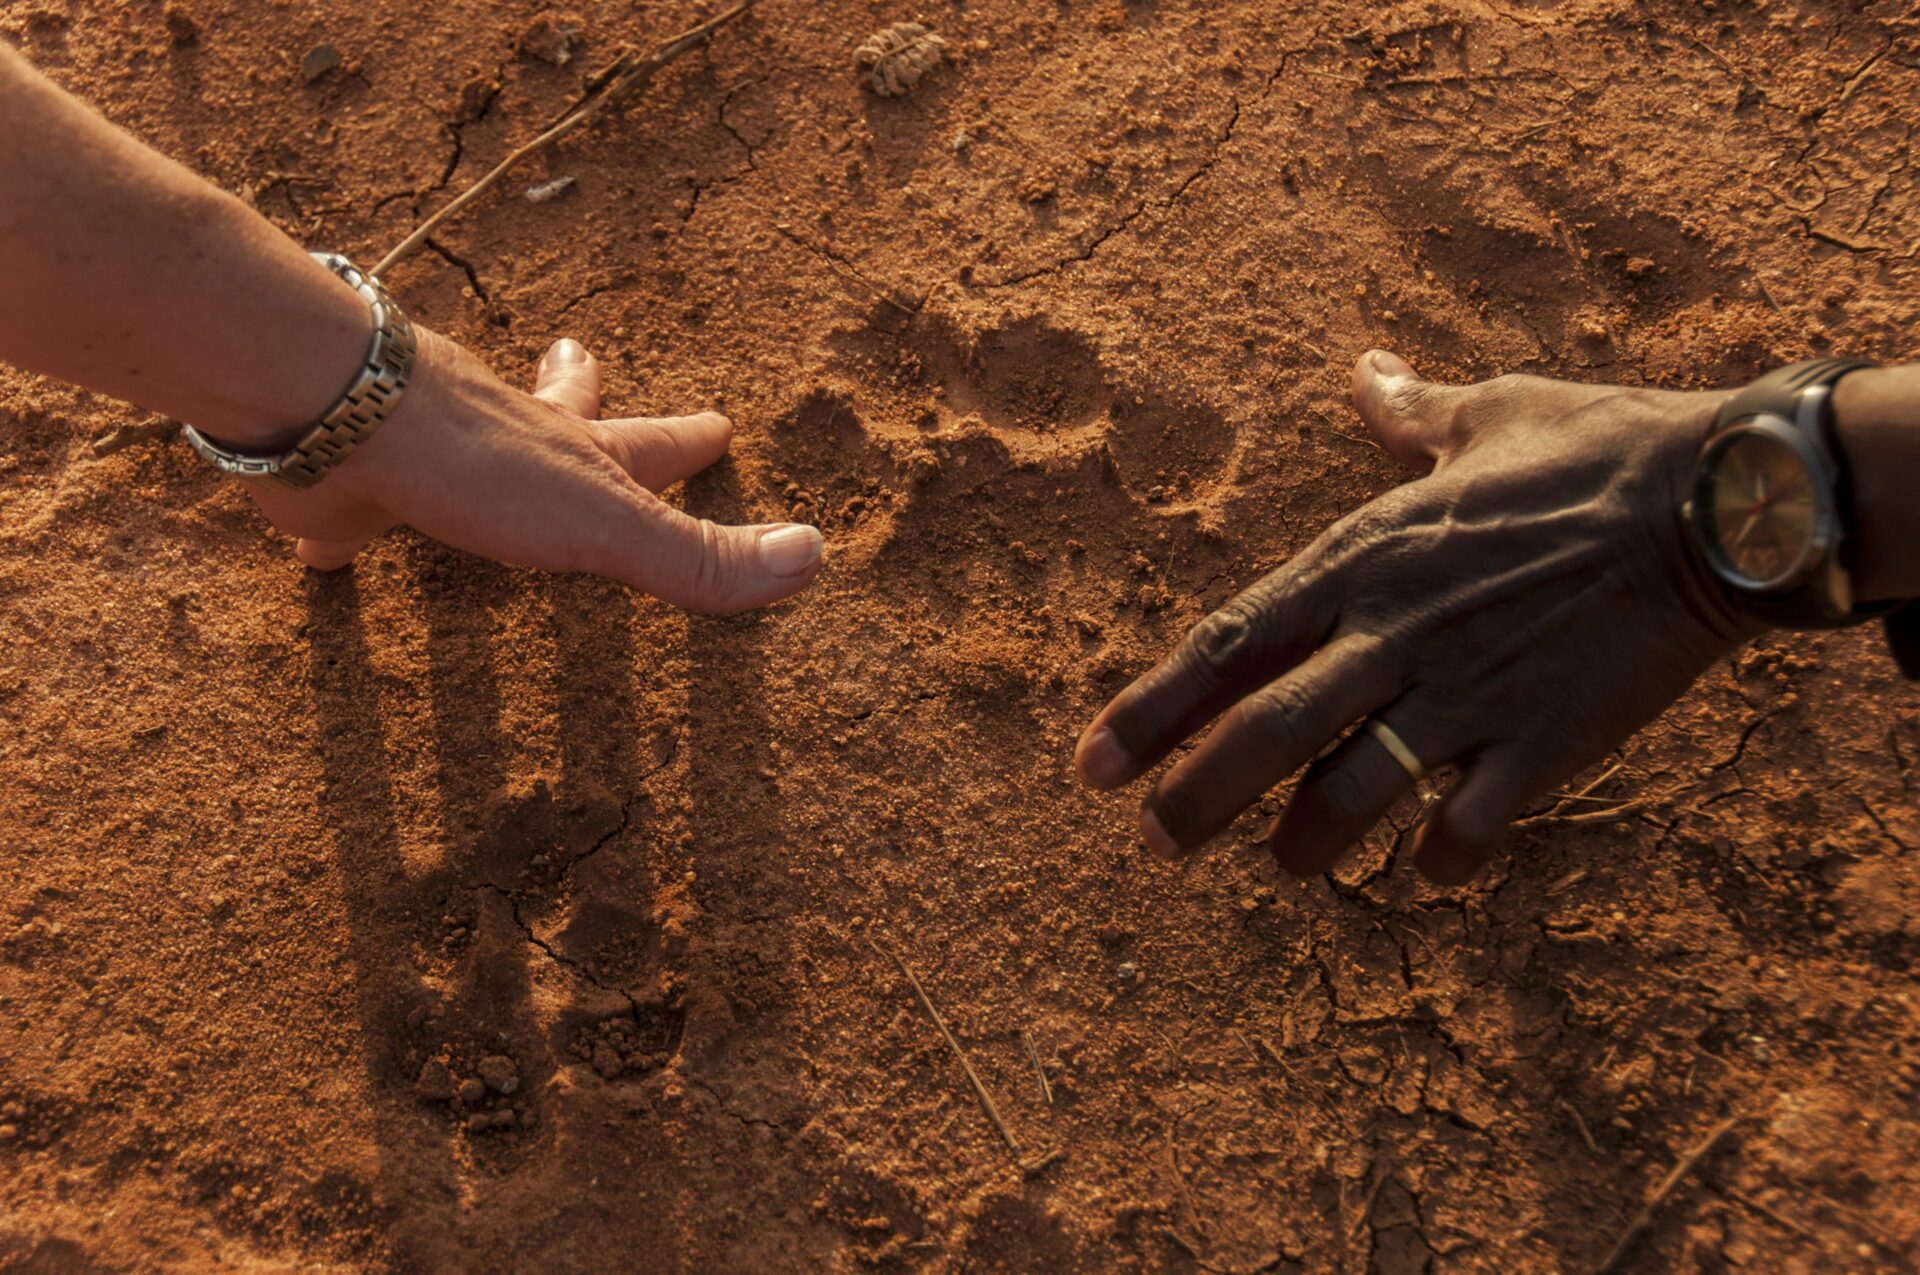 guest and guide comparing their hand print in the red dirt to that of a larger cat